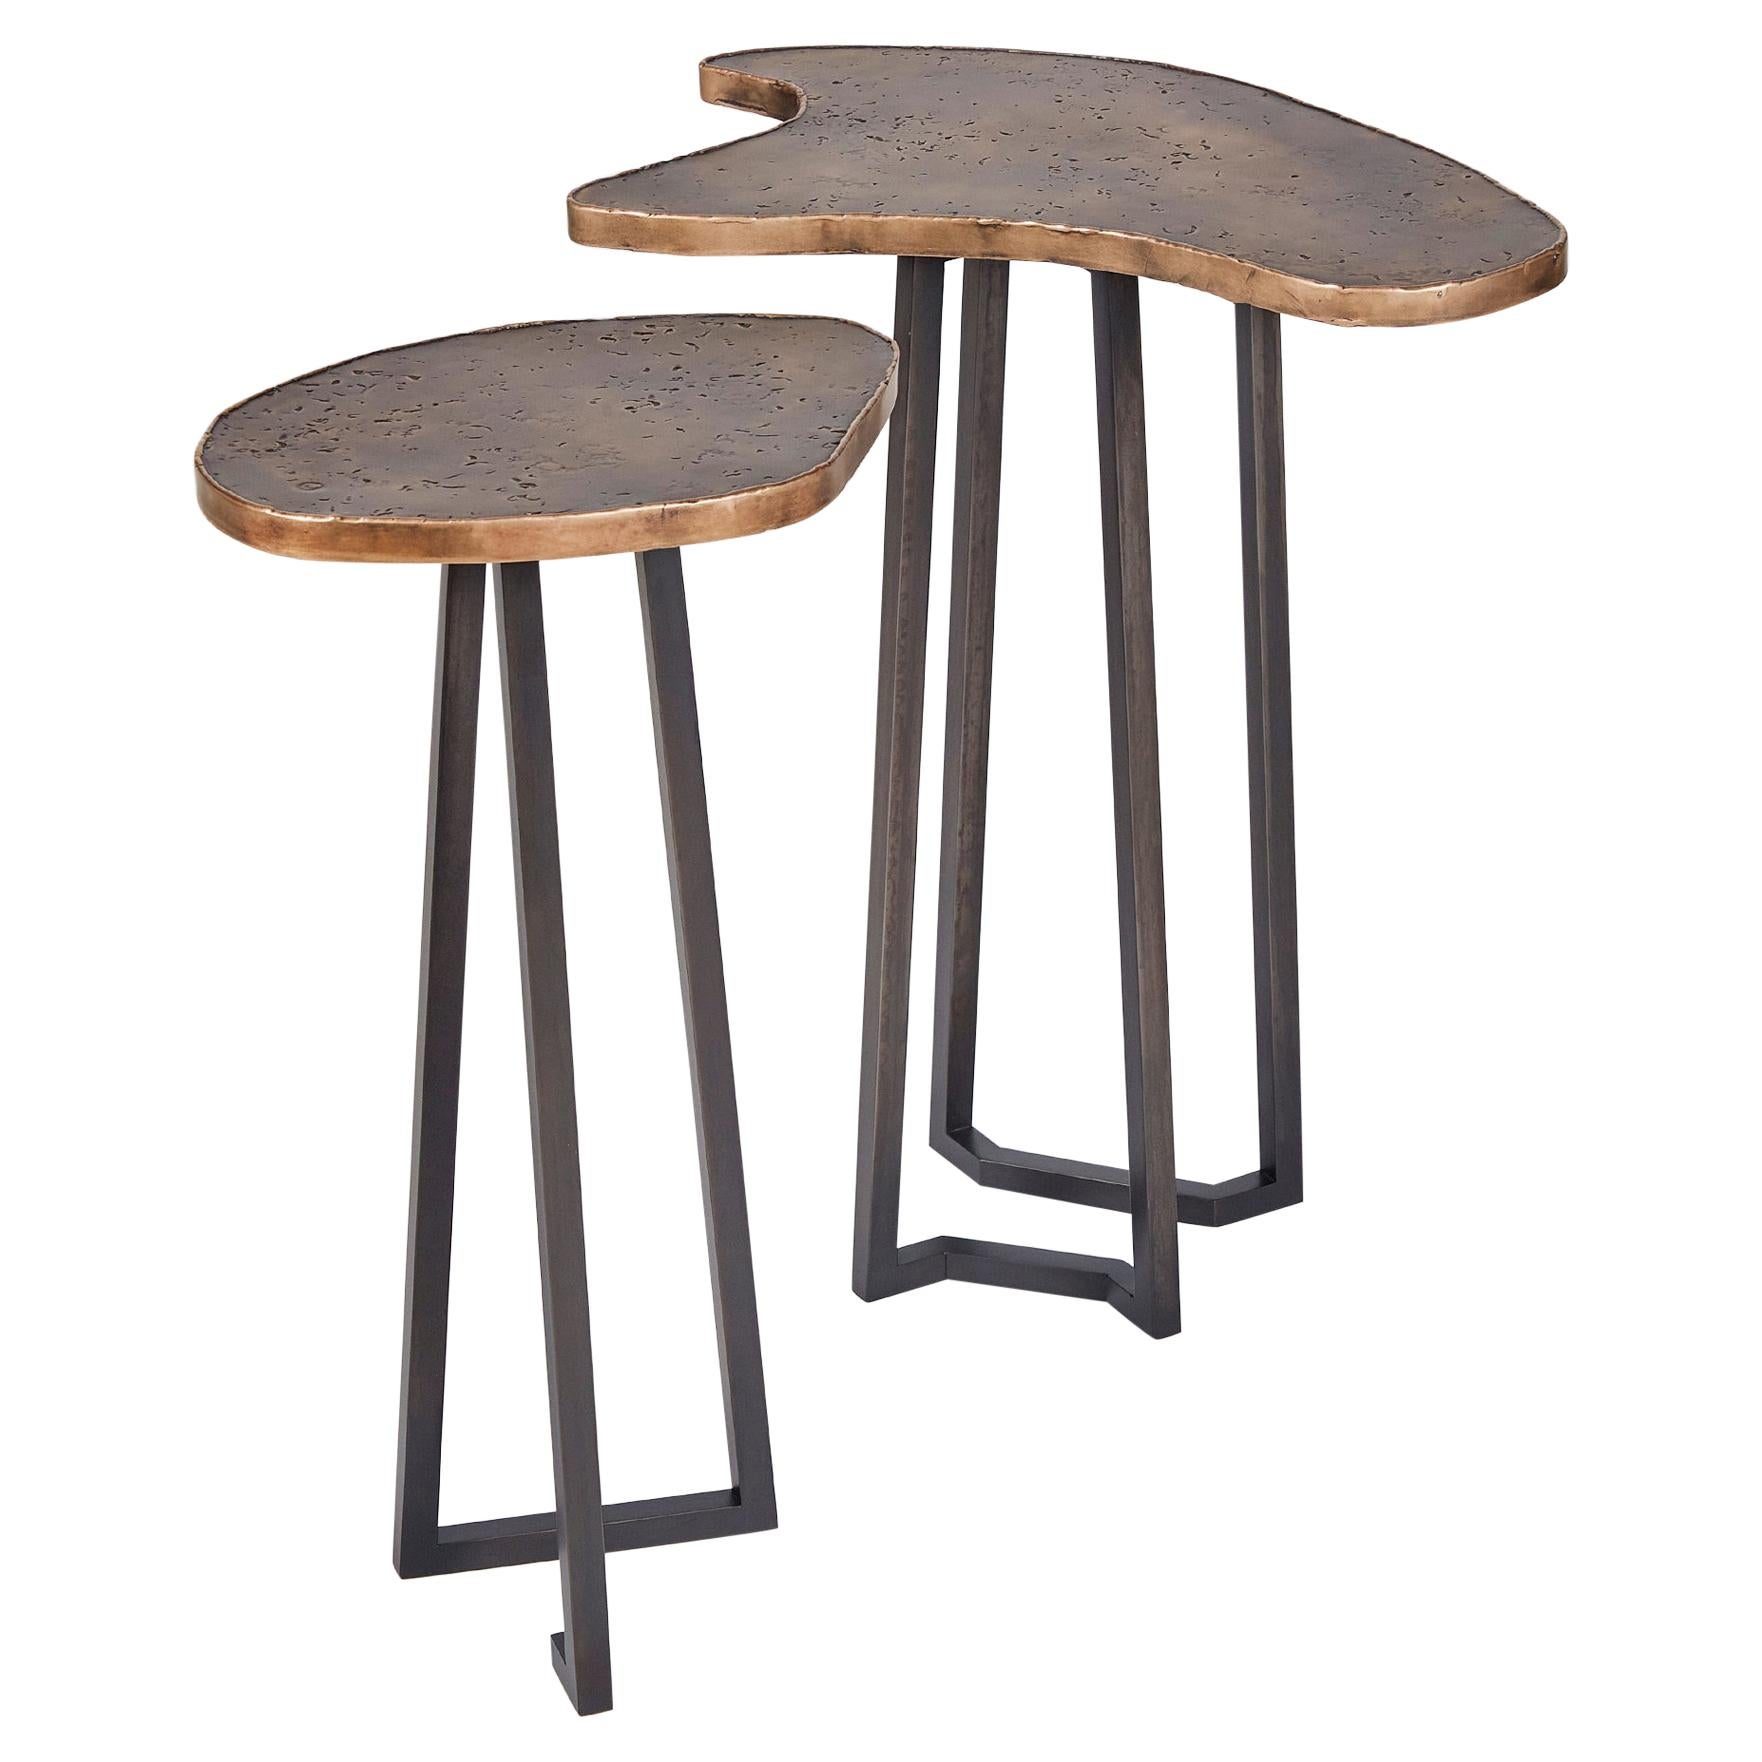 Douglas Fanning, Set of Conjoining Bronze Cocktail Tables, United States, 2020